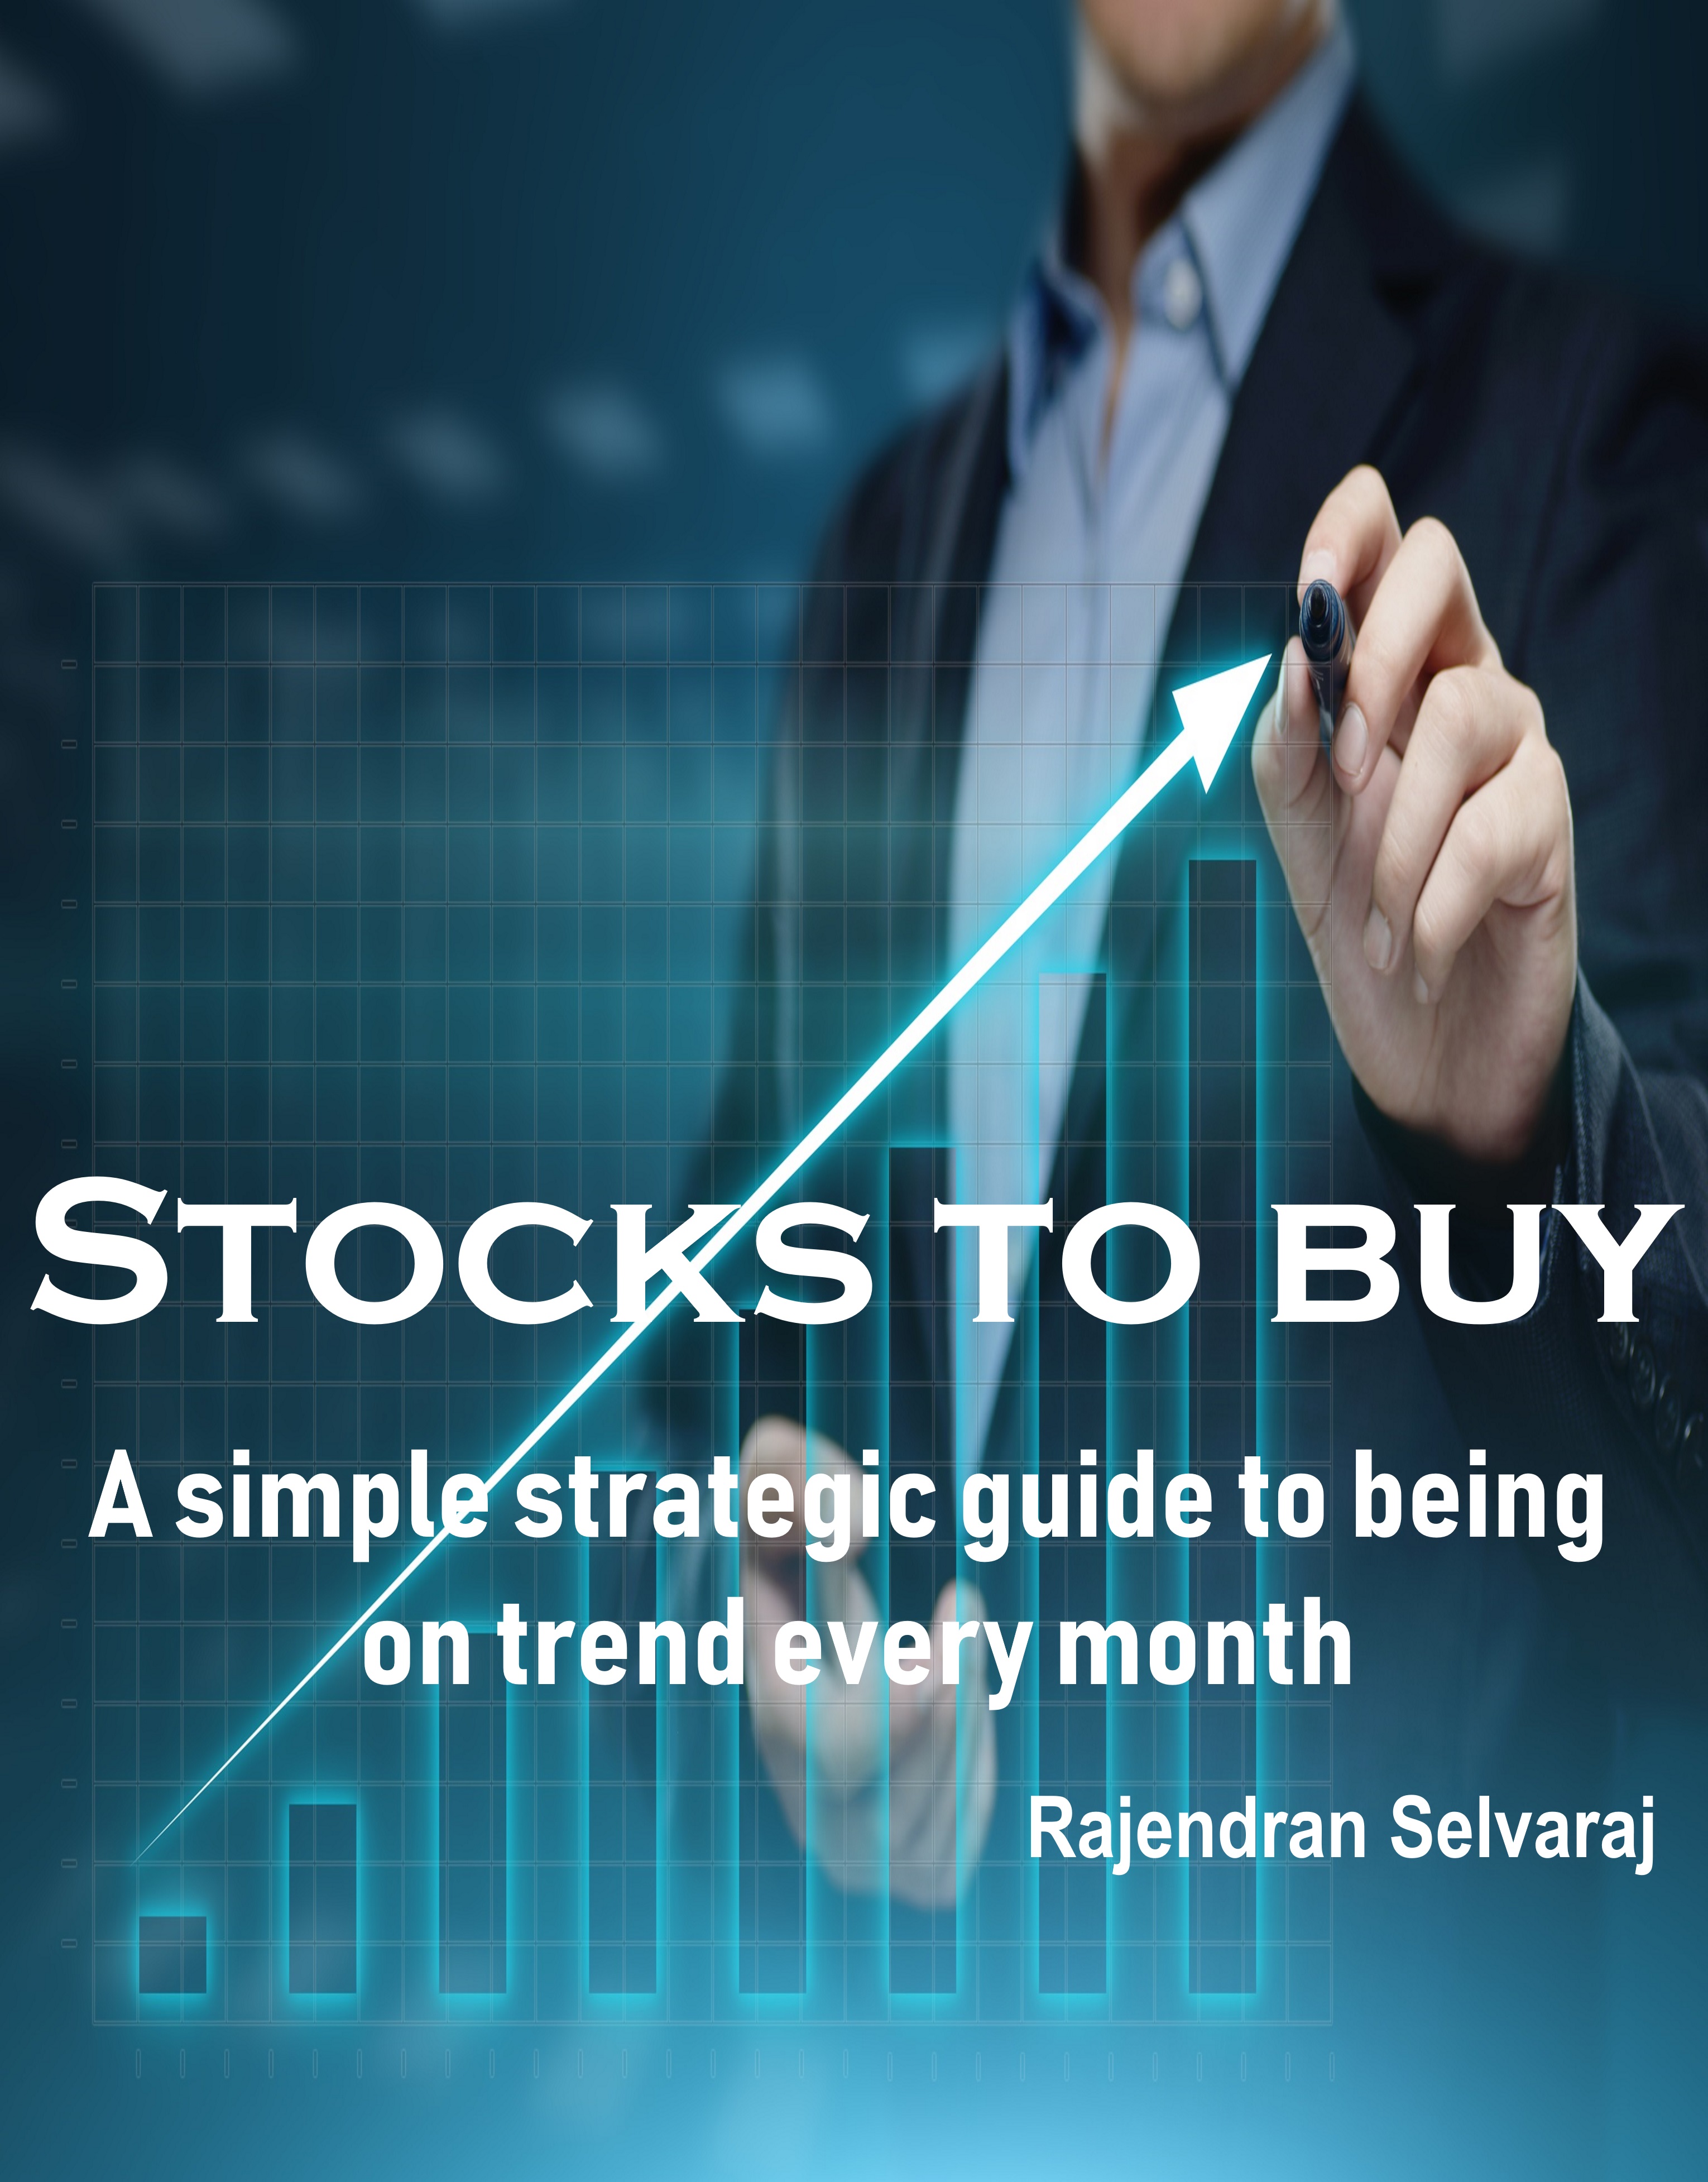 FREE: Stocks to Buy: A simple strategic guide to being on trend every month by Rajendran Selvaraj